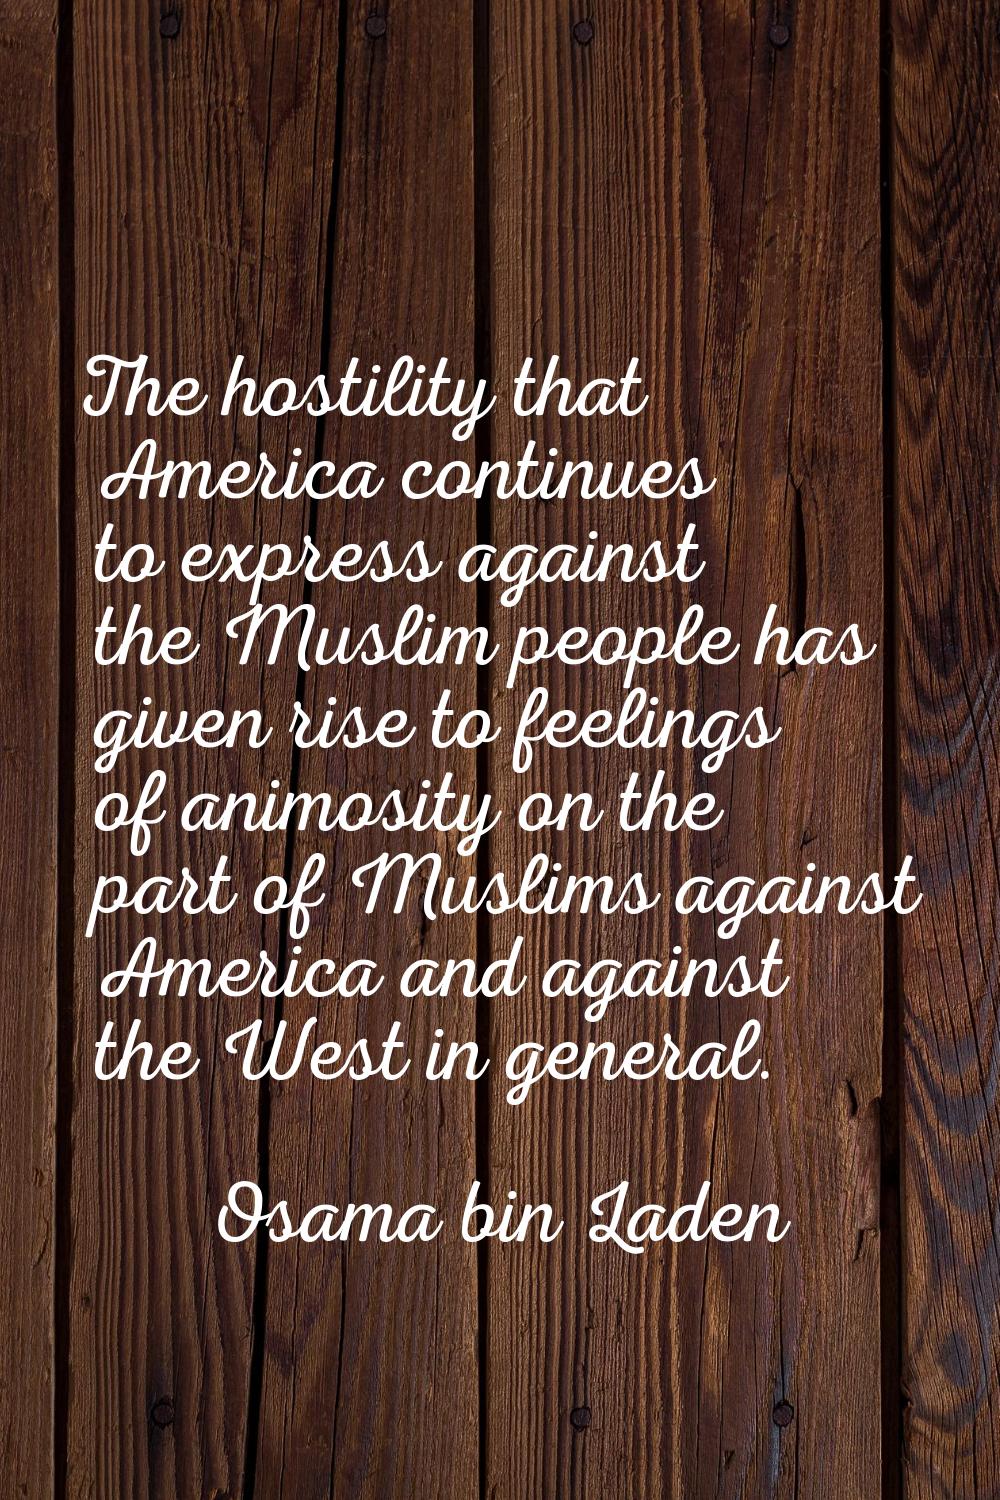 The hostility that America continues to express against the Muslim people has given rise to feeling